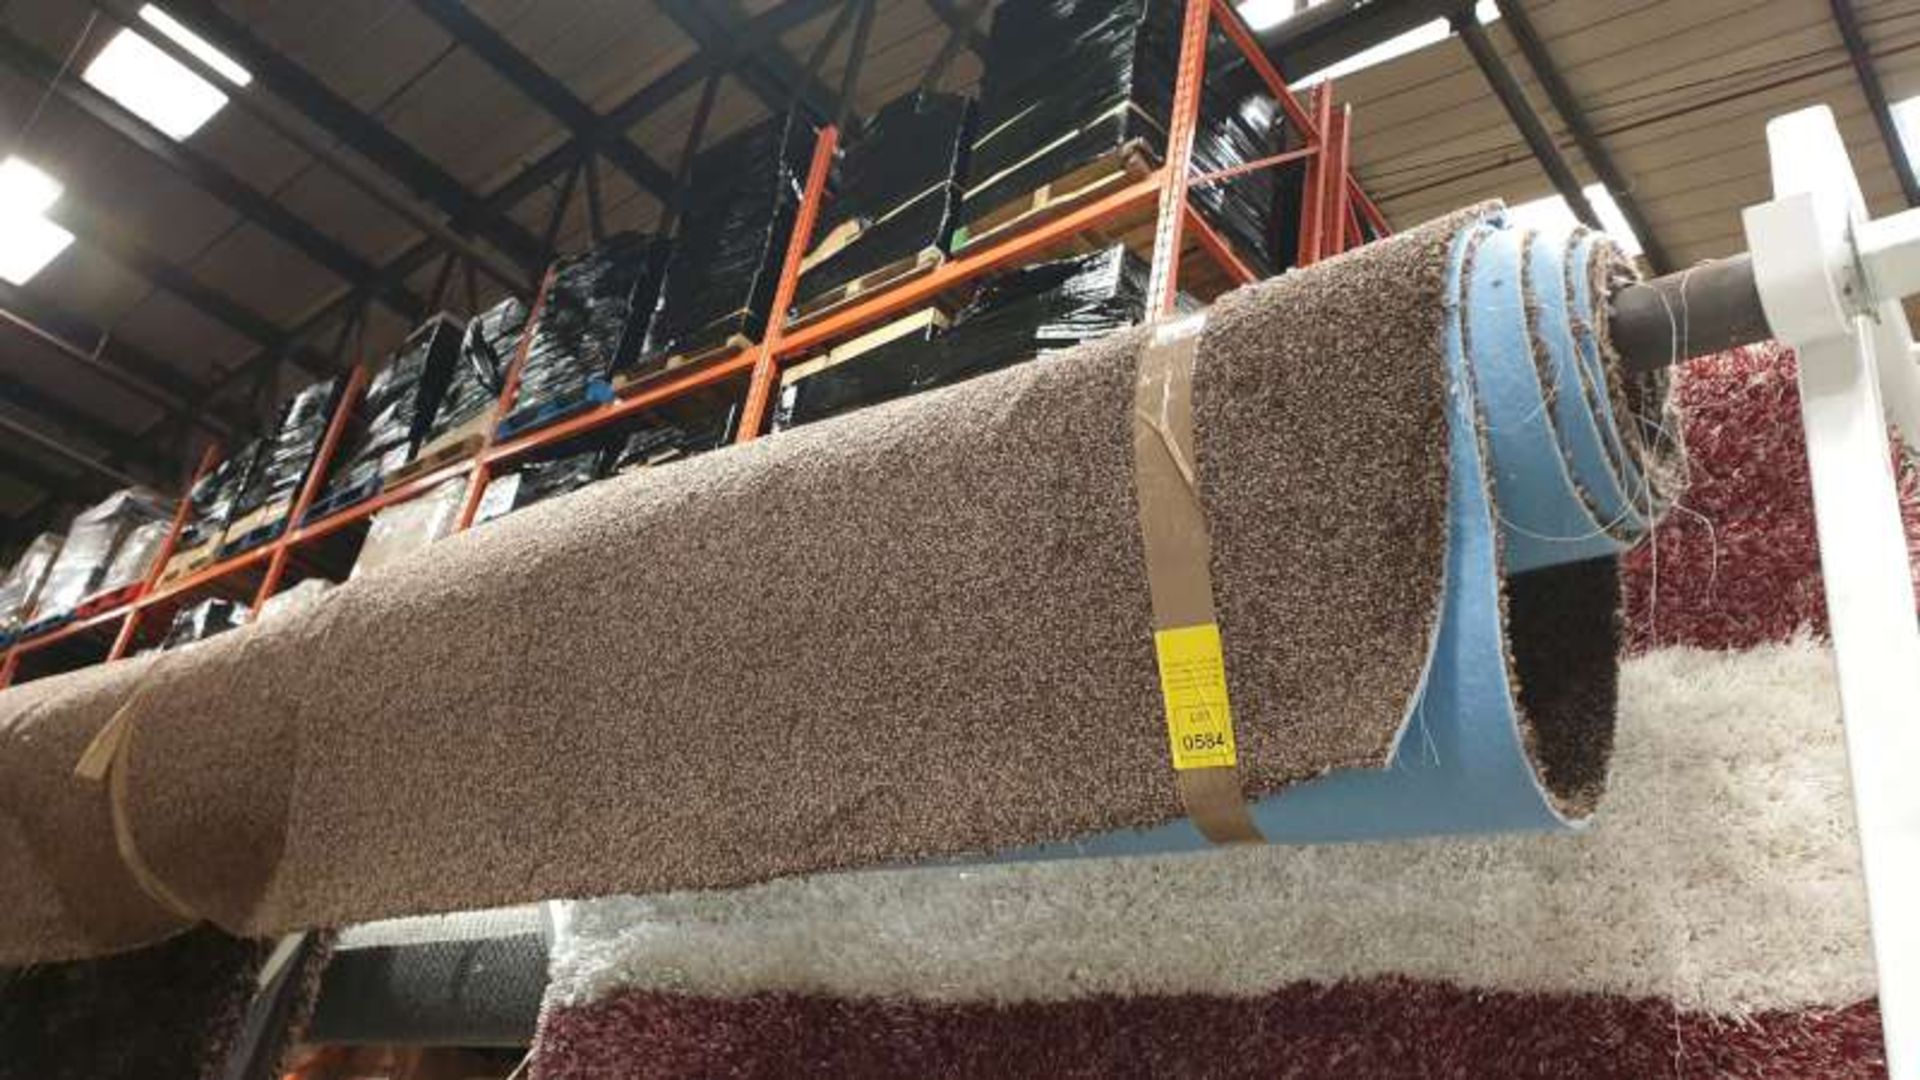 ROLL OF BROWN COLOURED CARPET APPROXIMATE SIZE 12' 10" X 13'